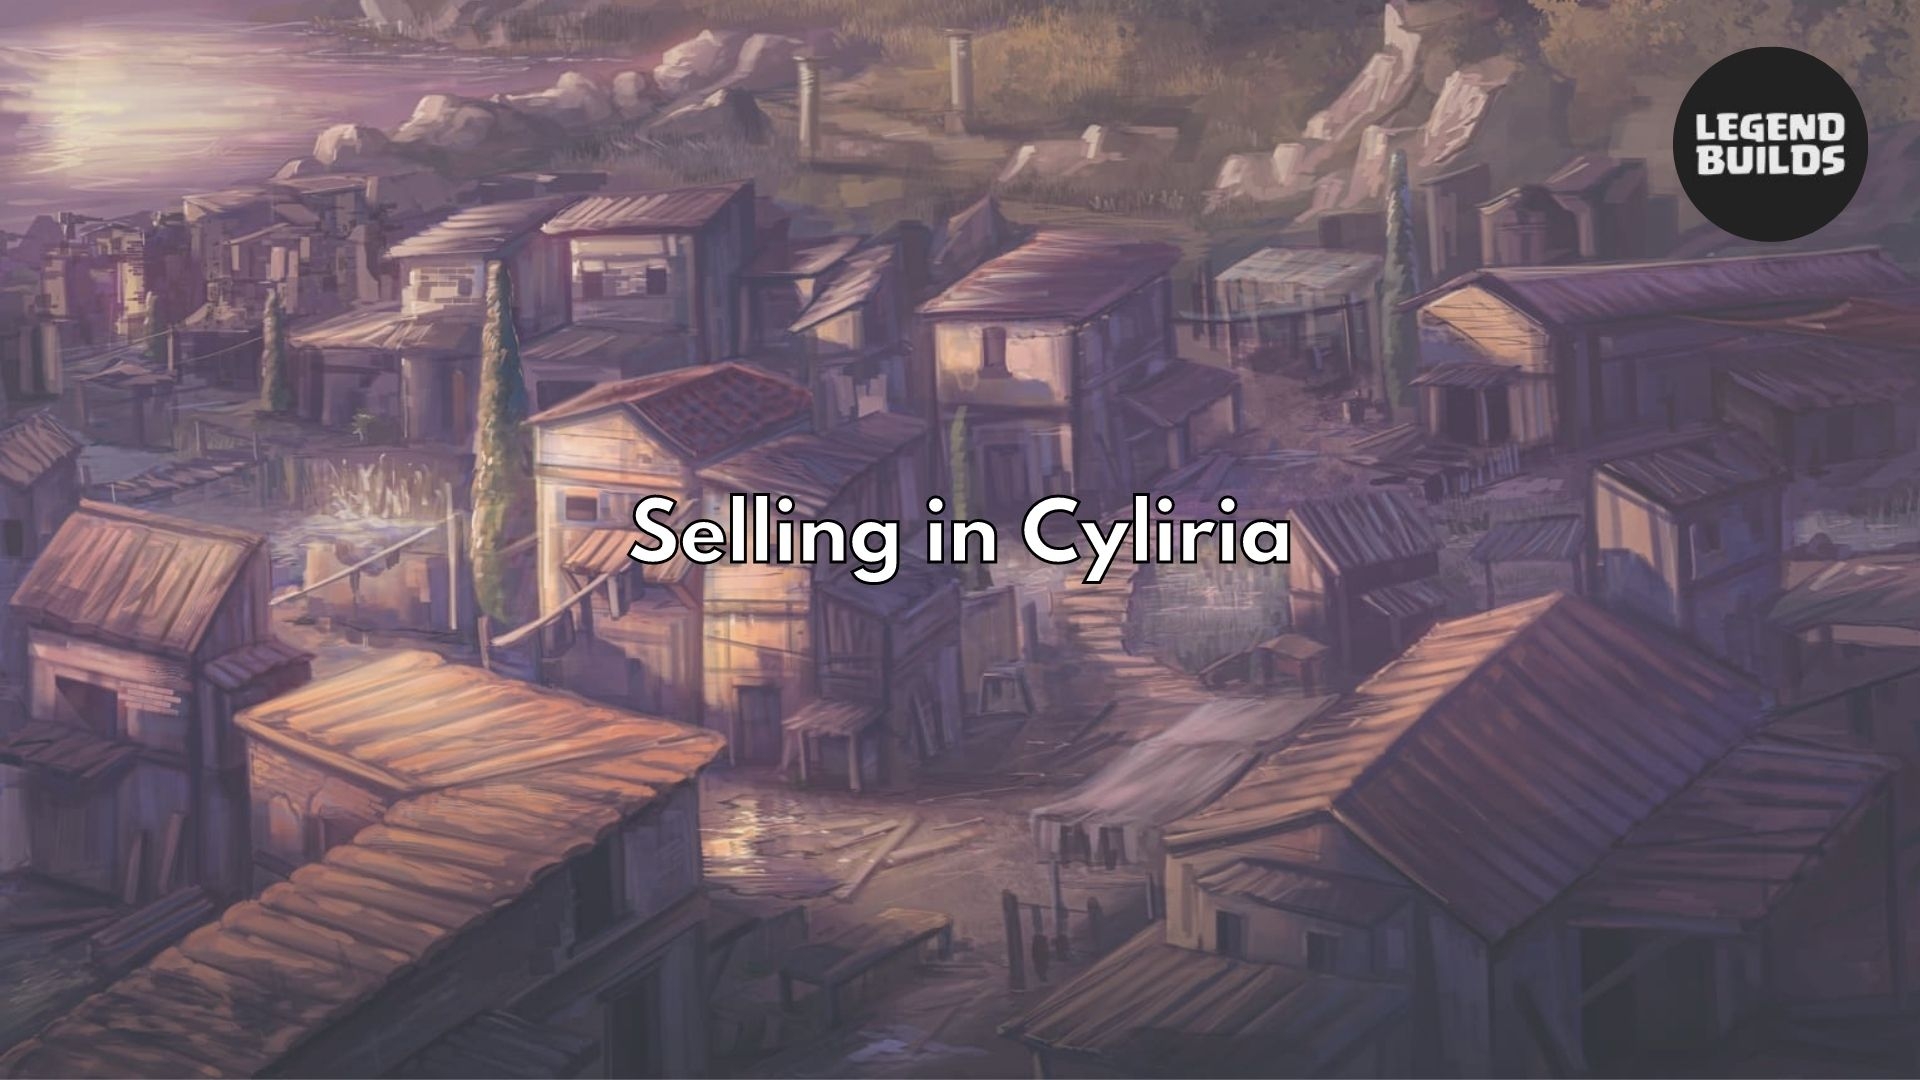 Shorty Stories - Selling in Cyliria